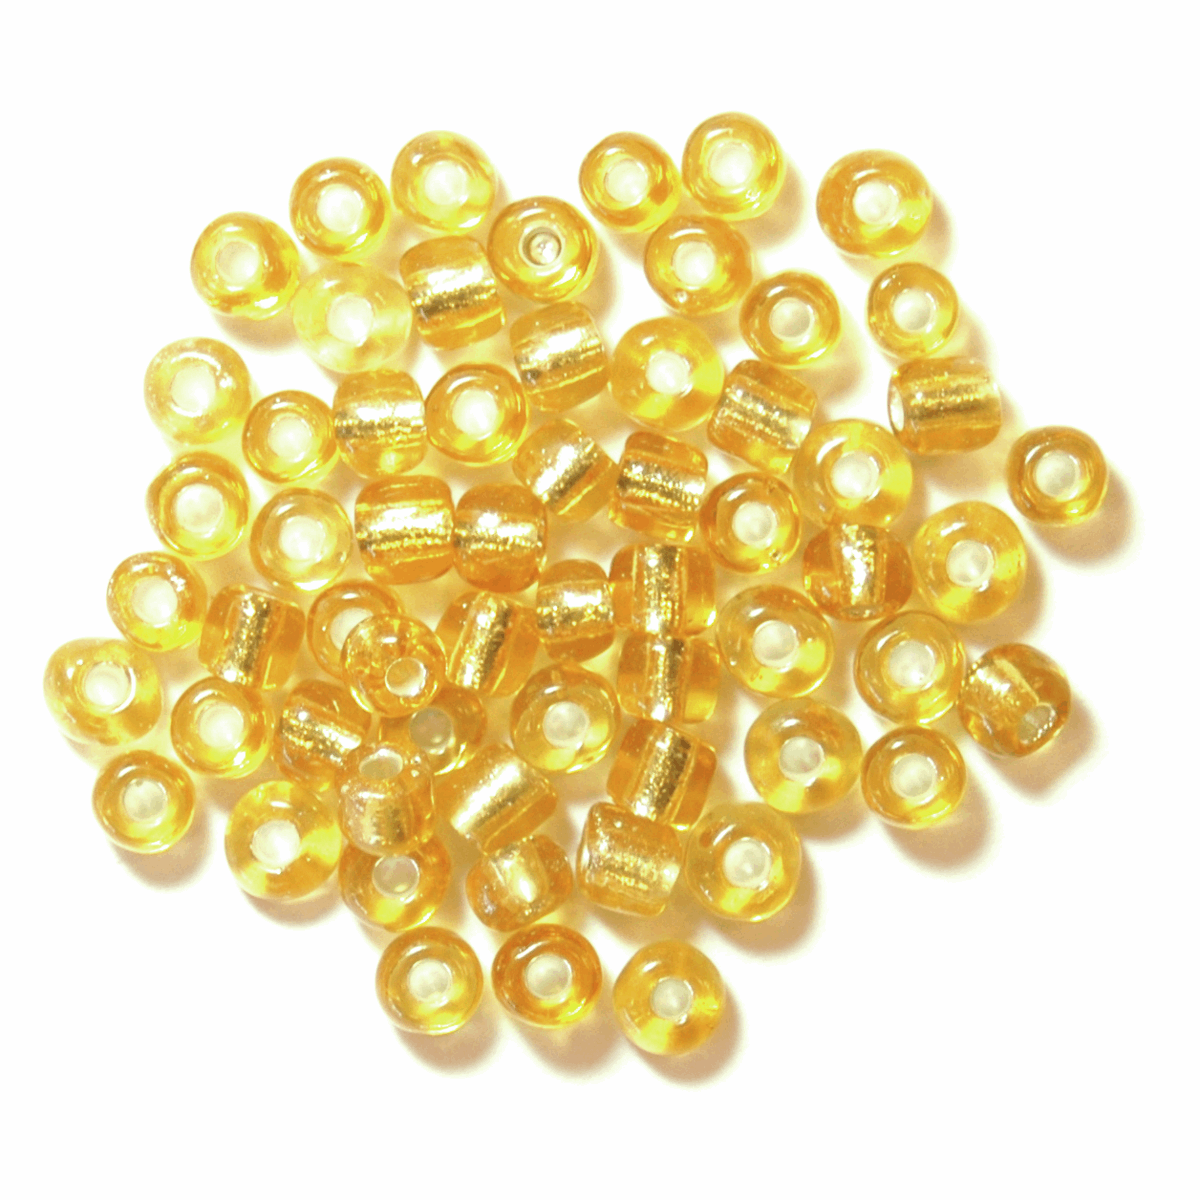 Trimits Gold E Beads - 4mm (Pack of 15g)